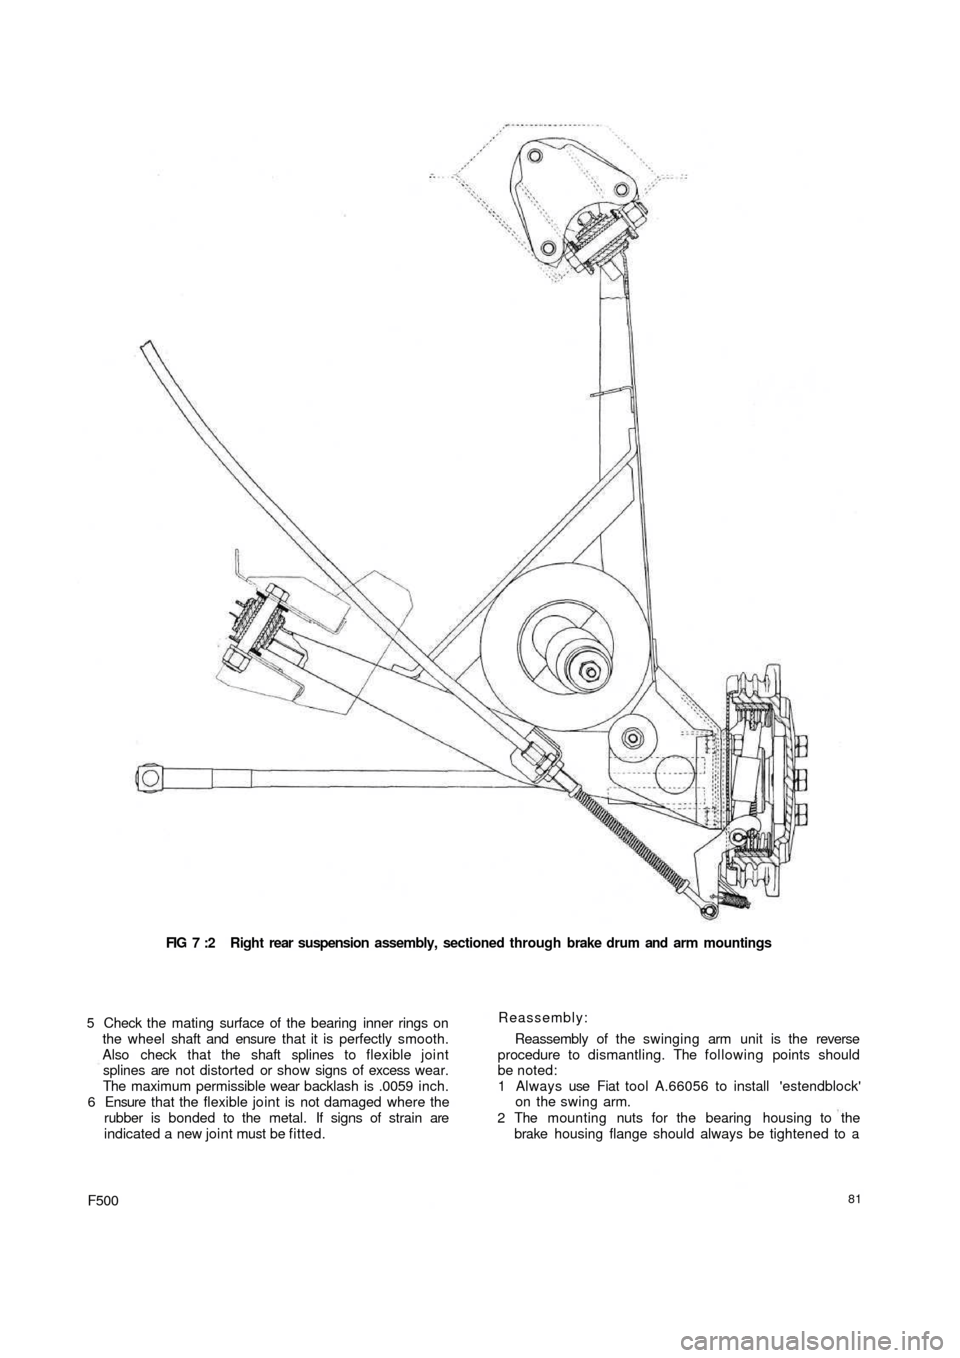 FIAT 500 1969 1.G Workshop Manual FIG 7 :2  Right rear suspension  assembly, sectioned through brake drum and arm mountings
5 Check the mating surface of the bearing inner rings on
the wheel shaft and ensure that it is perfectly smoot